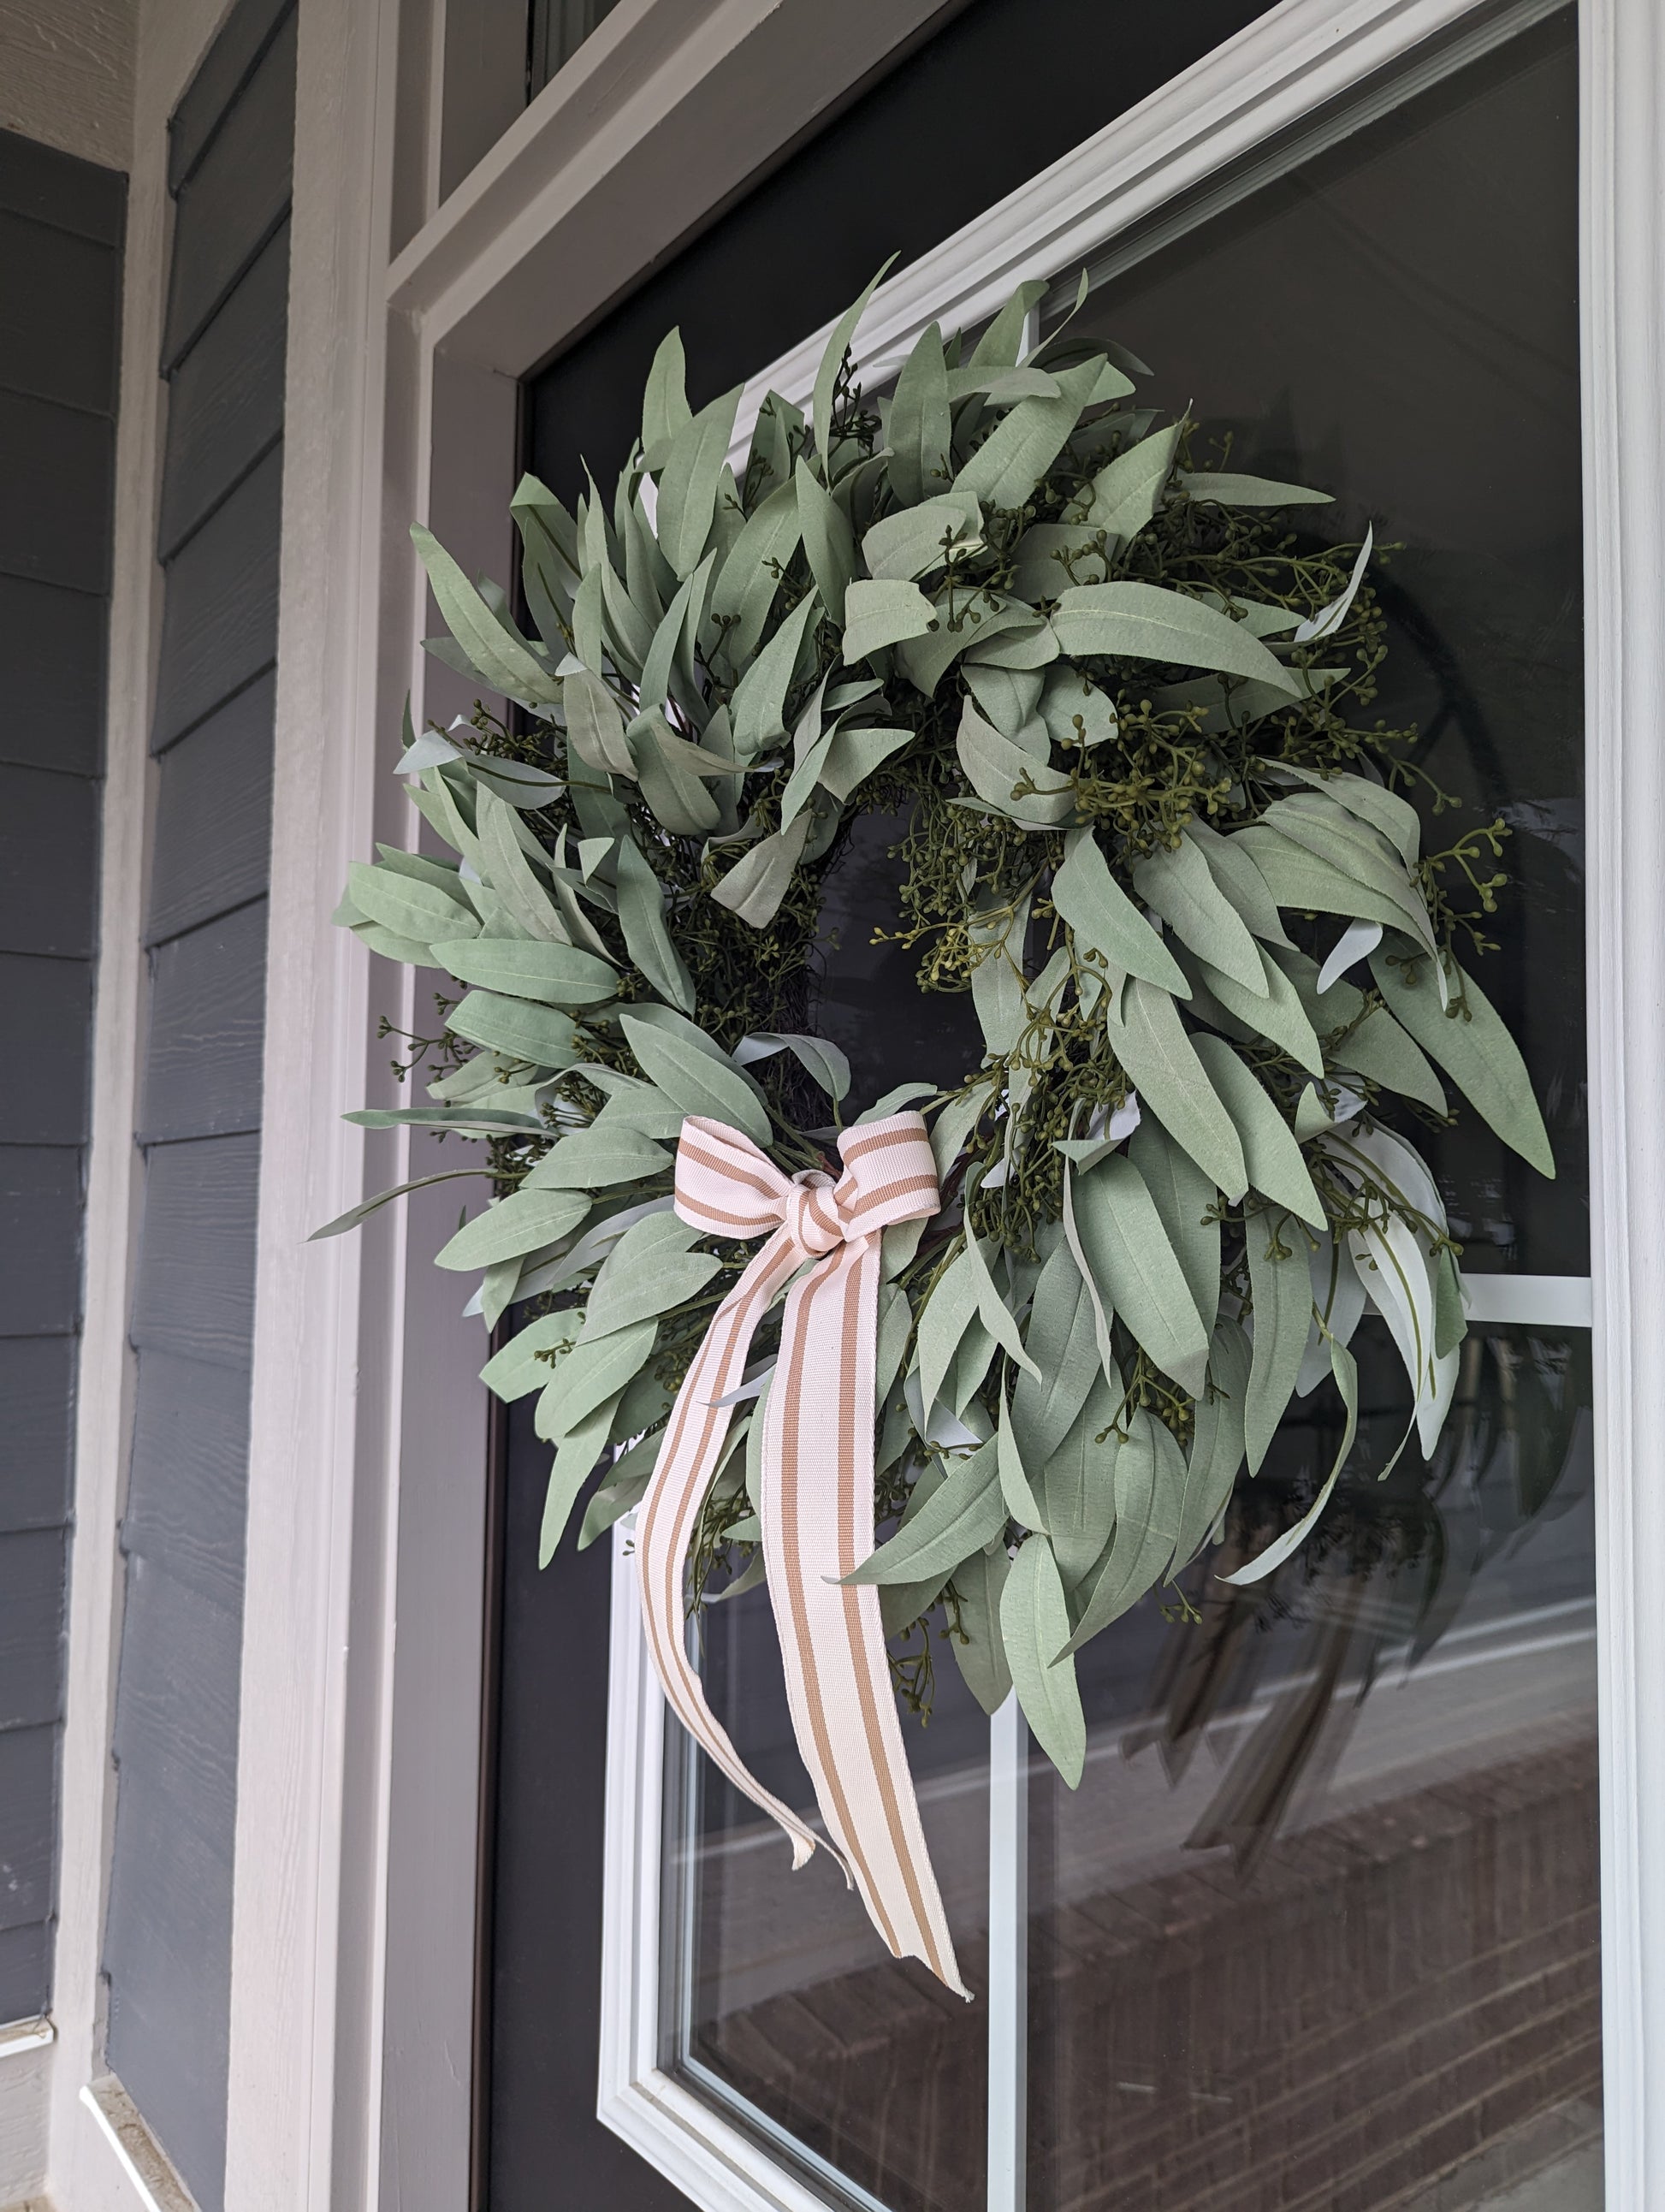 20-inch Artificial Seeded Eucalyptus Wreath, featuring a stylish striped tan bow and perfect for adding a touch of lifelike greenery to your front door this spring and summer season. This artificial wreath is crafted with high-quality materials and designed to look just like the real thing. 